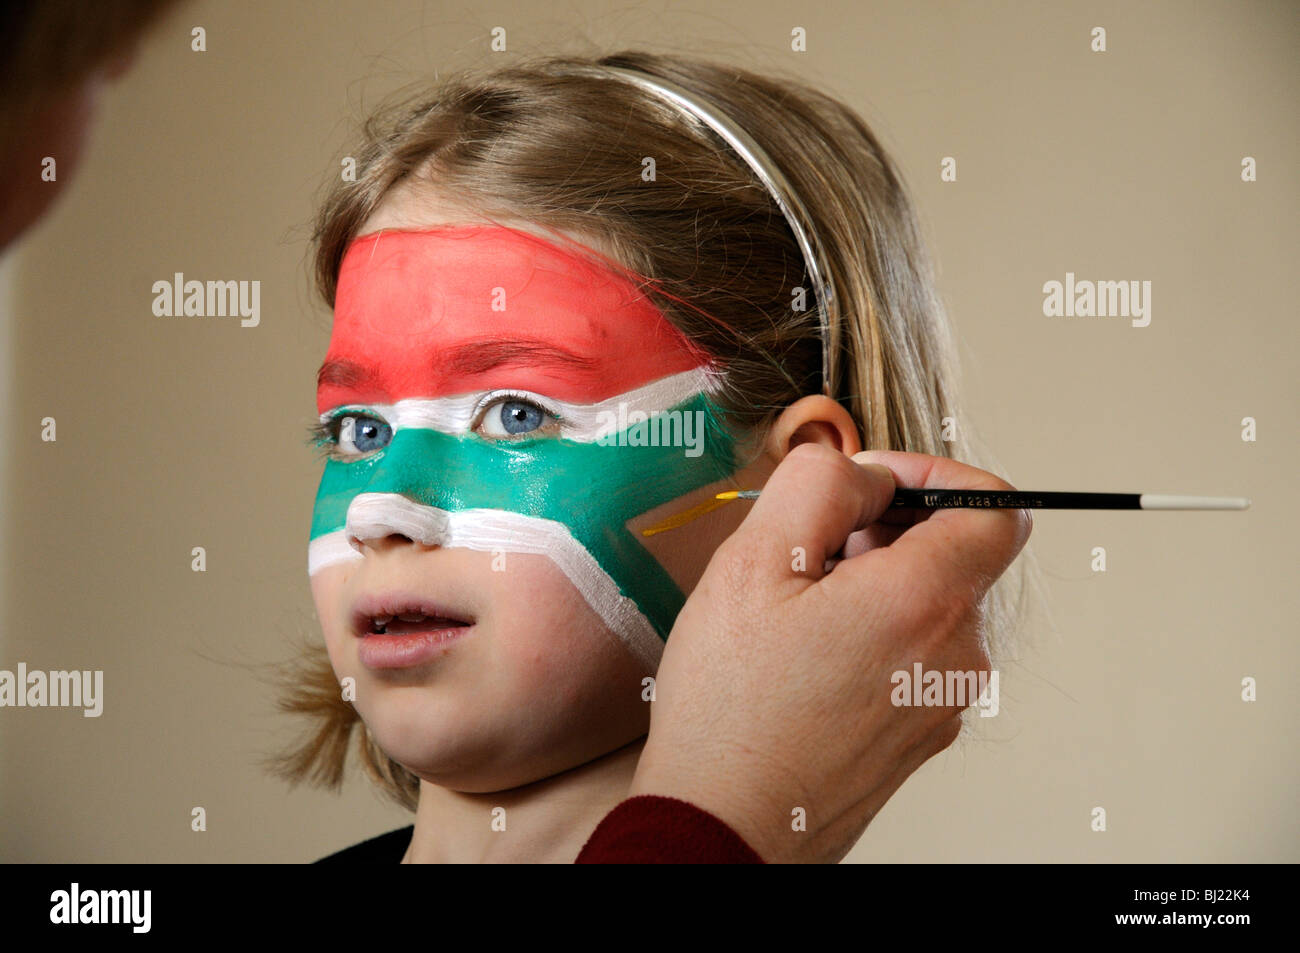 Little girl having her face painted with the national flag of South Africa Stock Photo